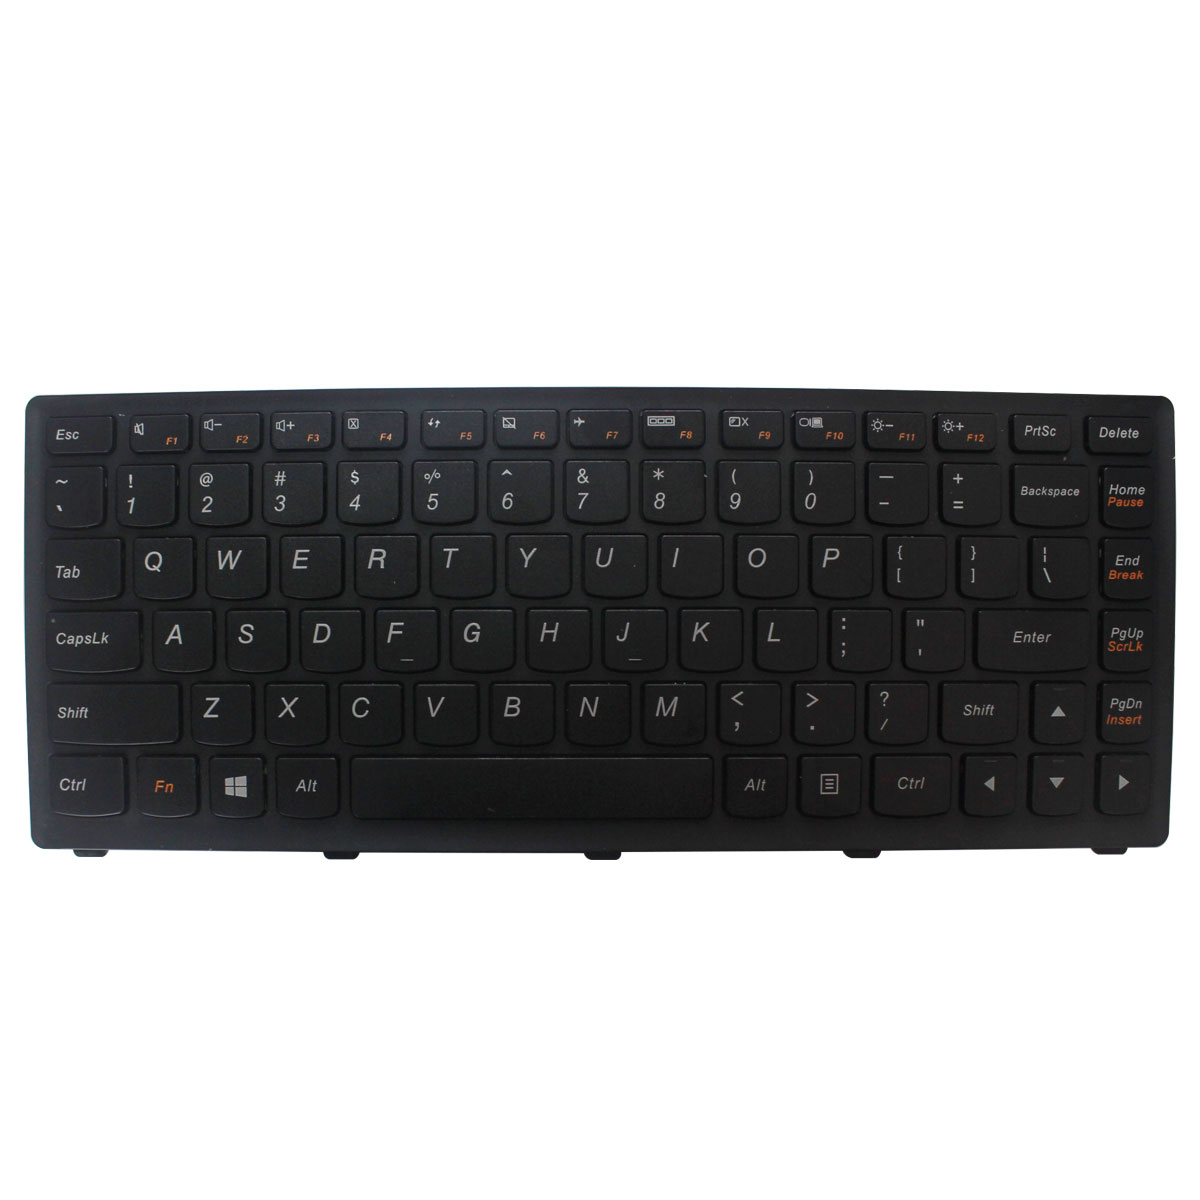 Compatible laptop keyboard for Ideapad S300 S400 S405 S410 S415 - Click Image to Close